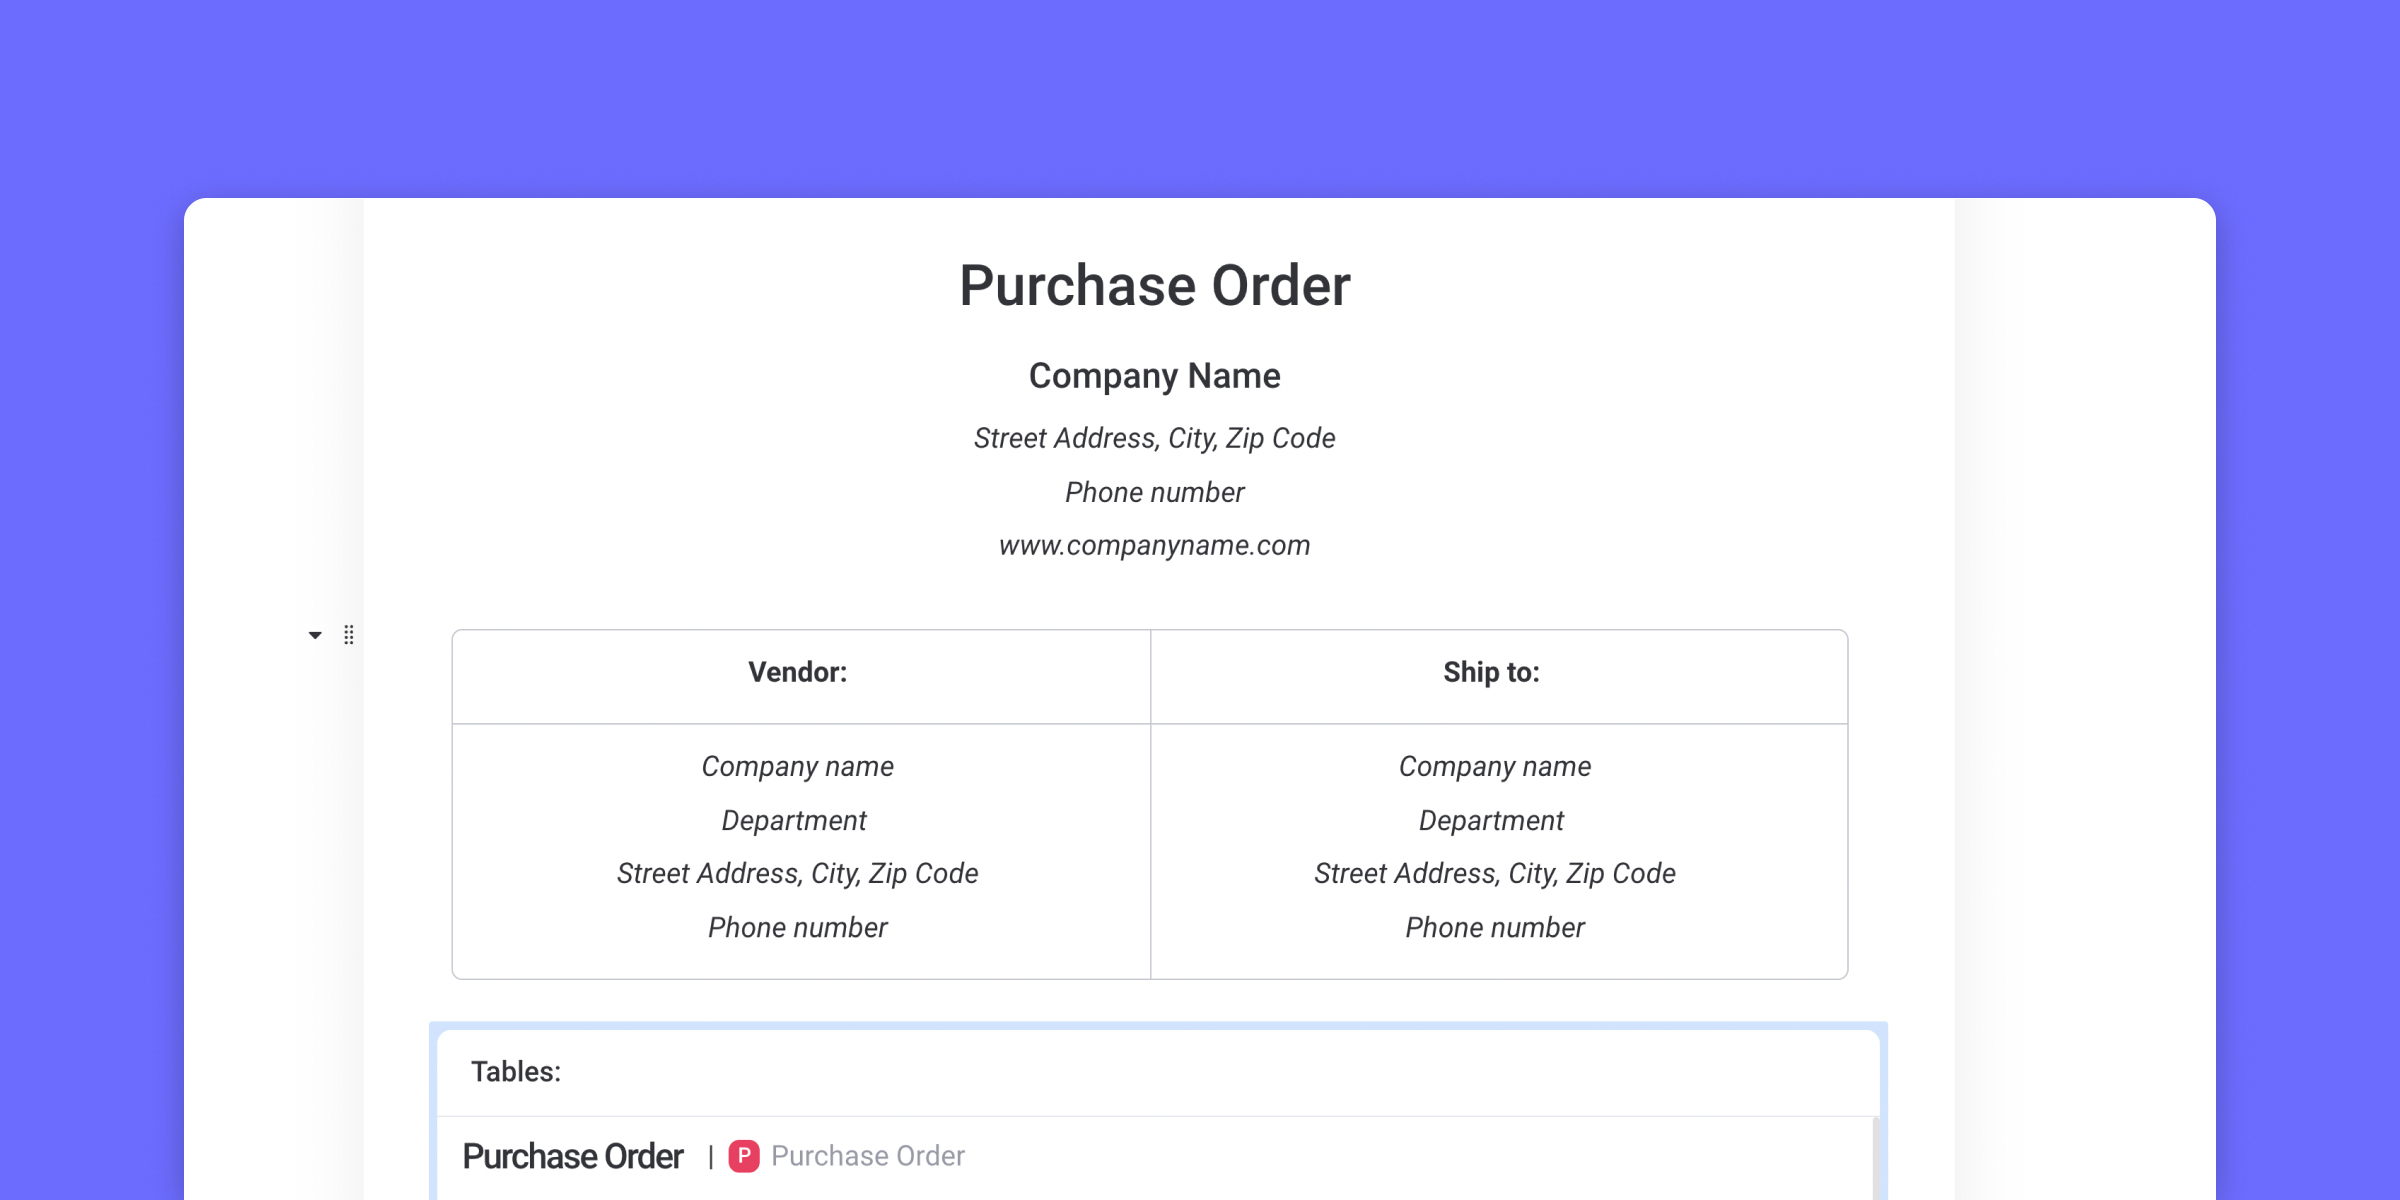 Printable work order templates to manage your work orders